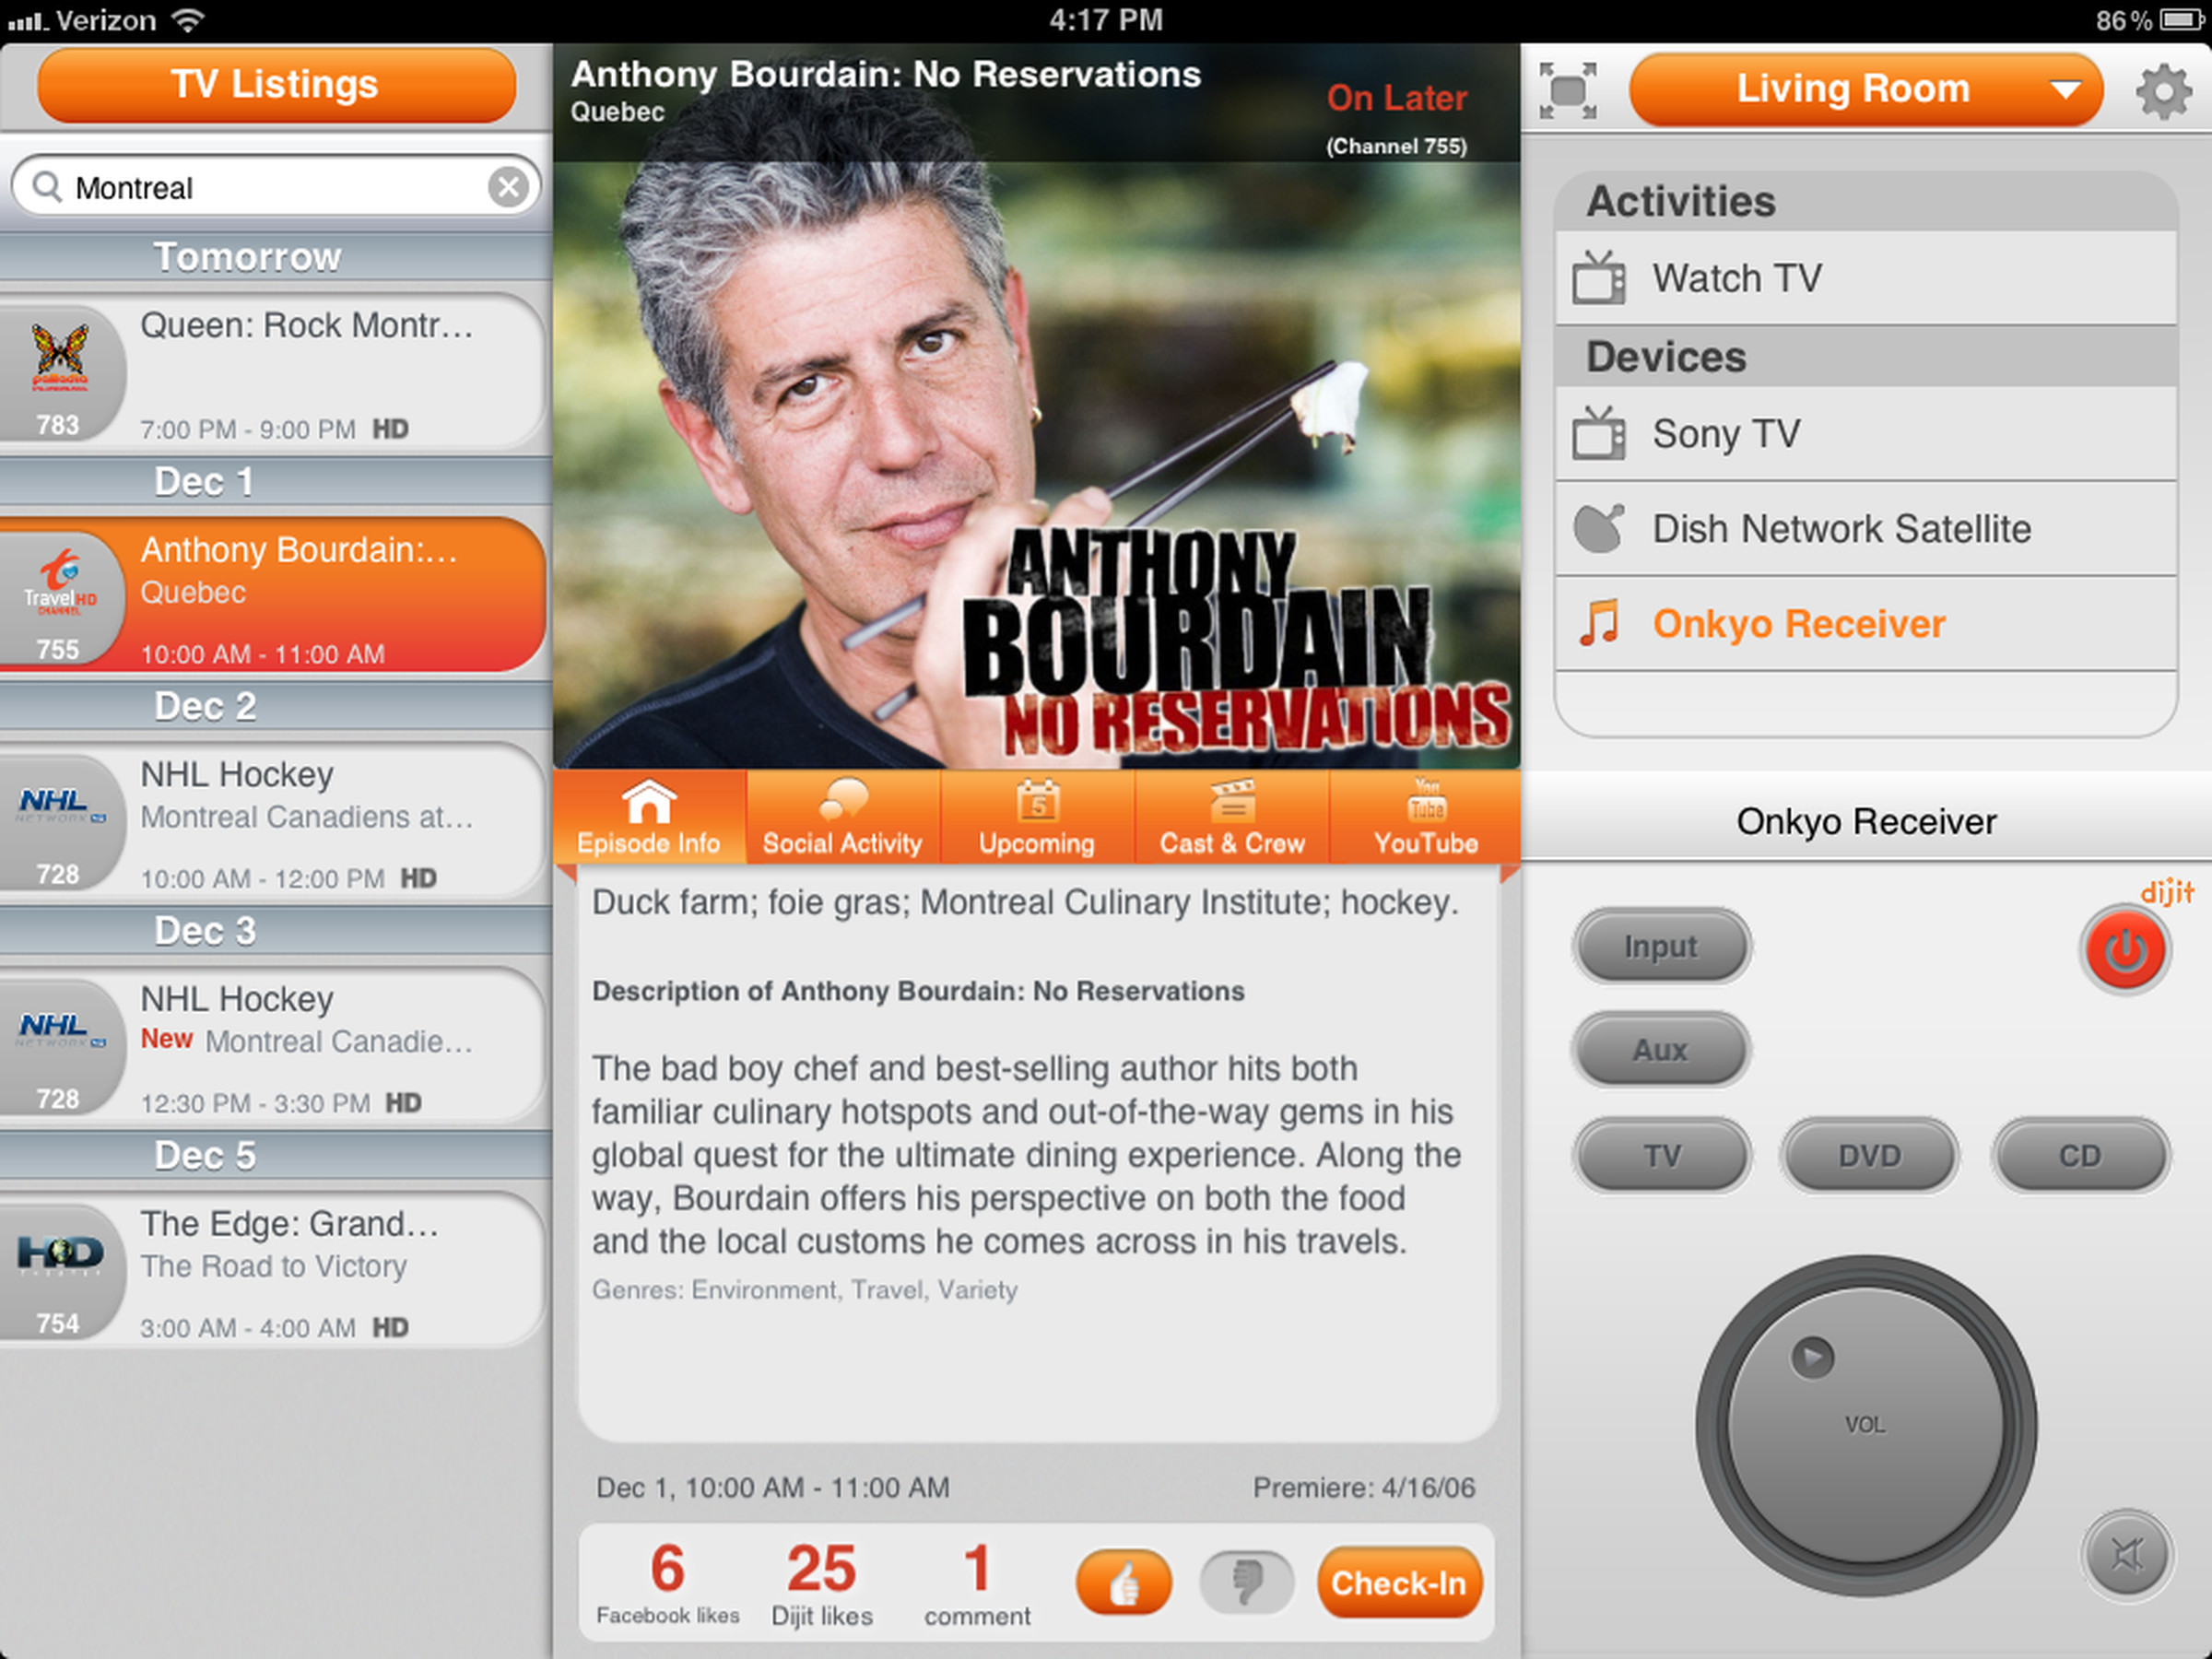 Dijit universal remote and TV guide app for iPad